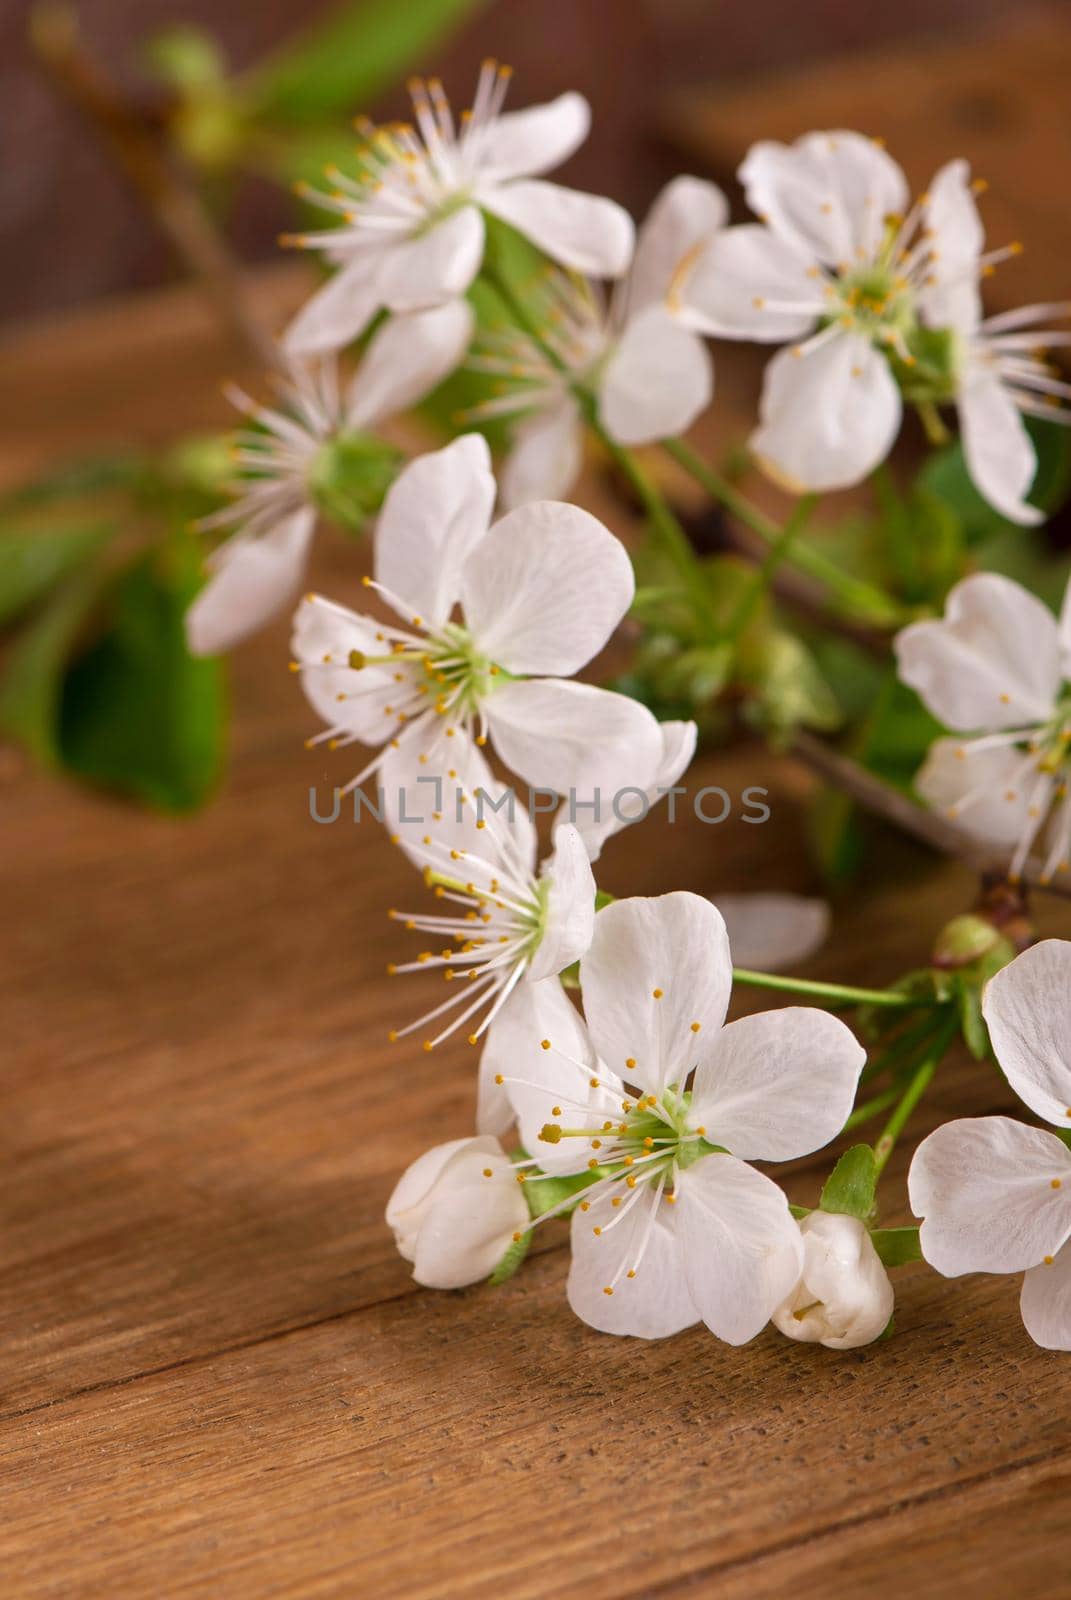 image of spring white cherry blossoms tree on wooden. vintage filtered image